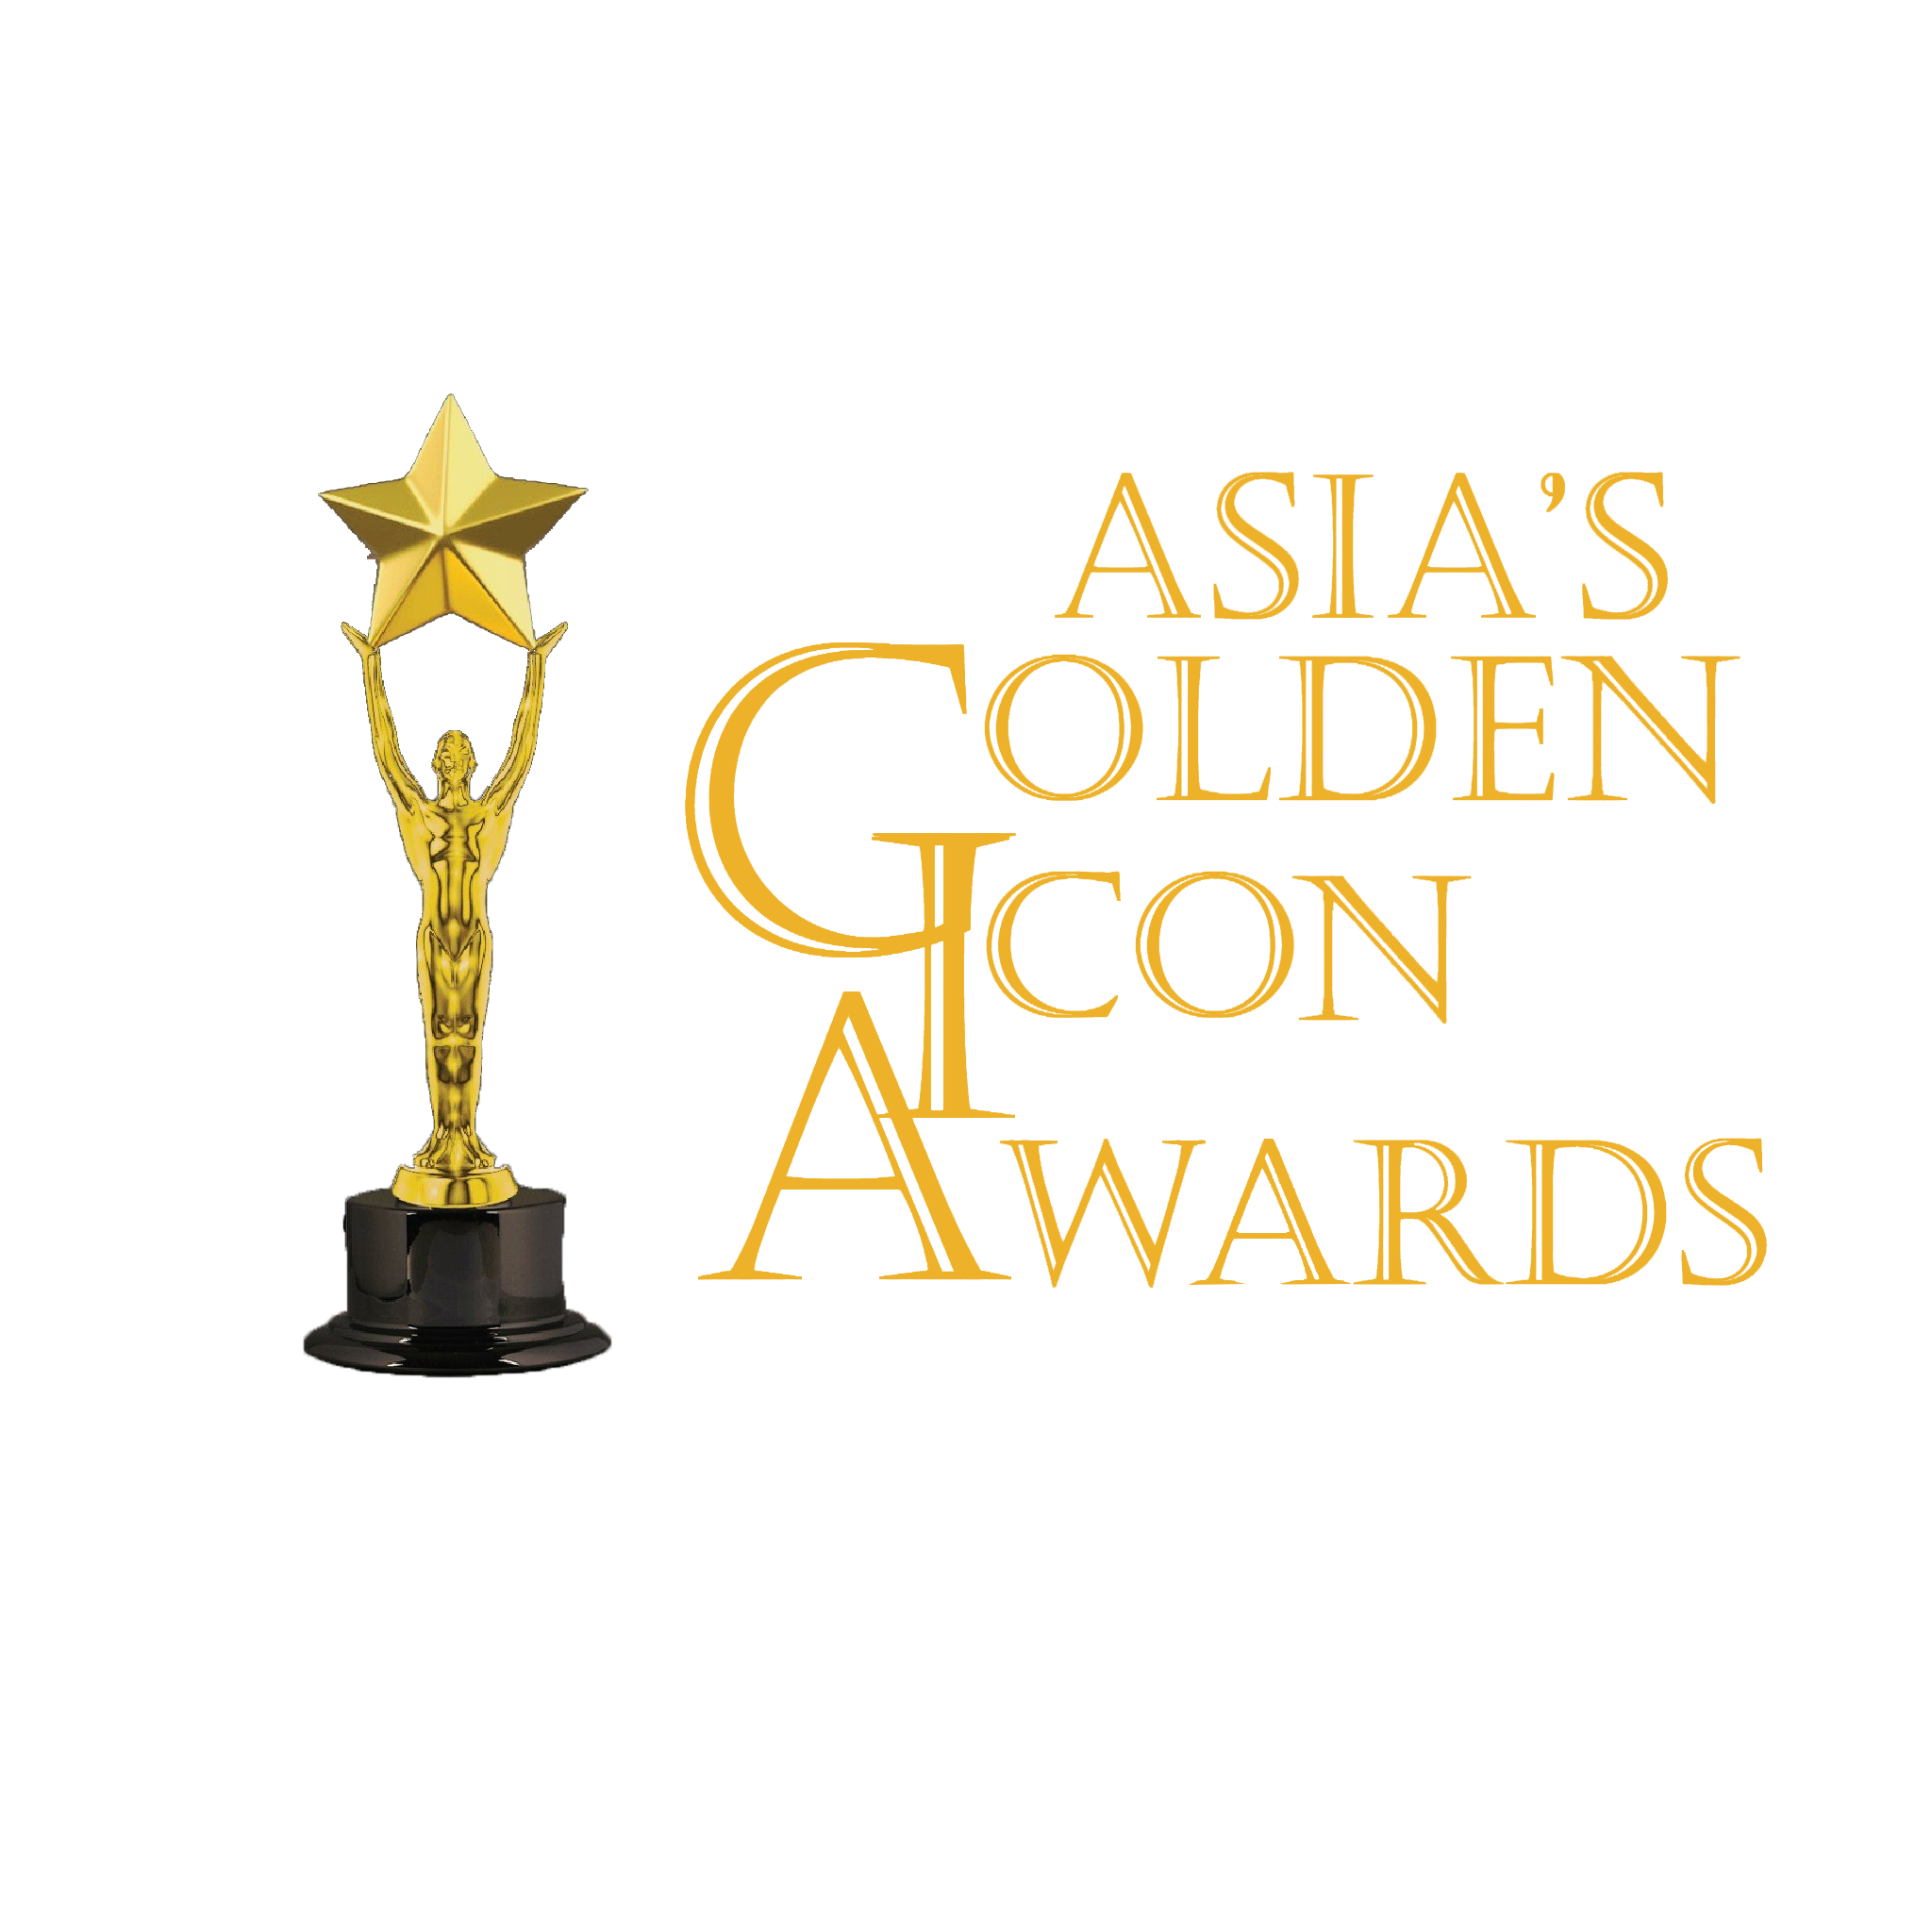 Asia's Golden Icons Awards